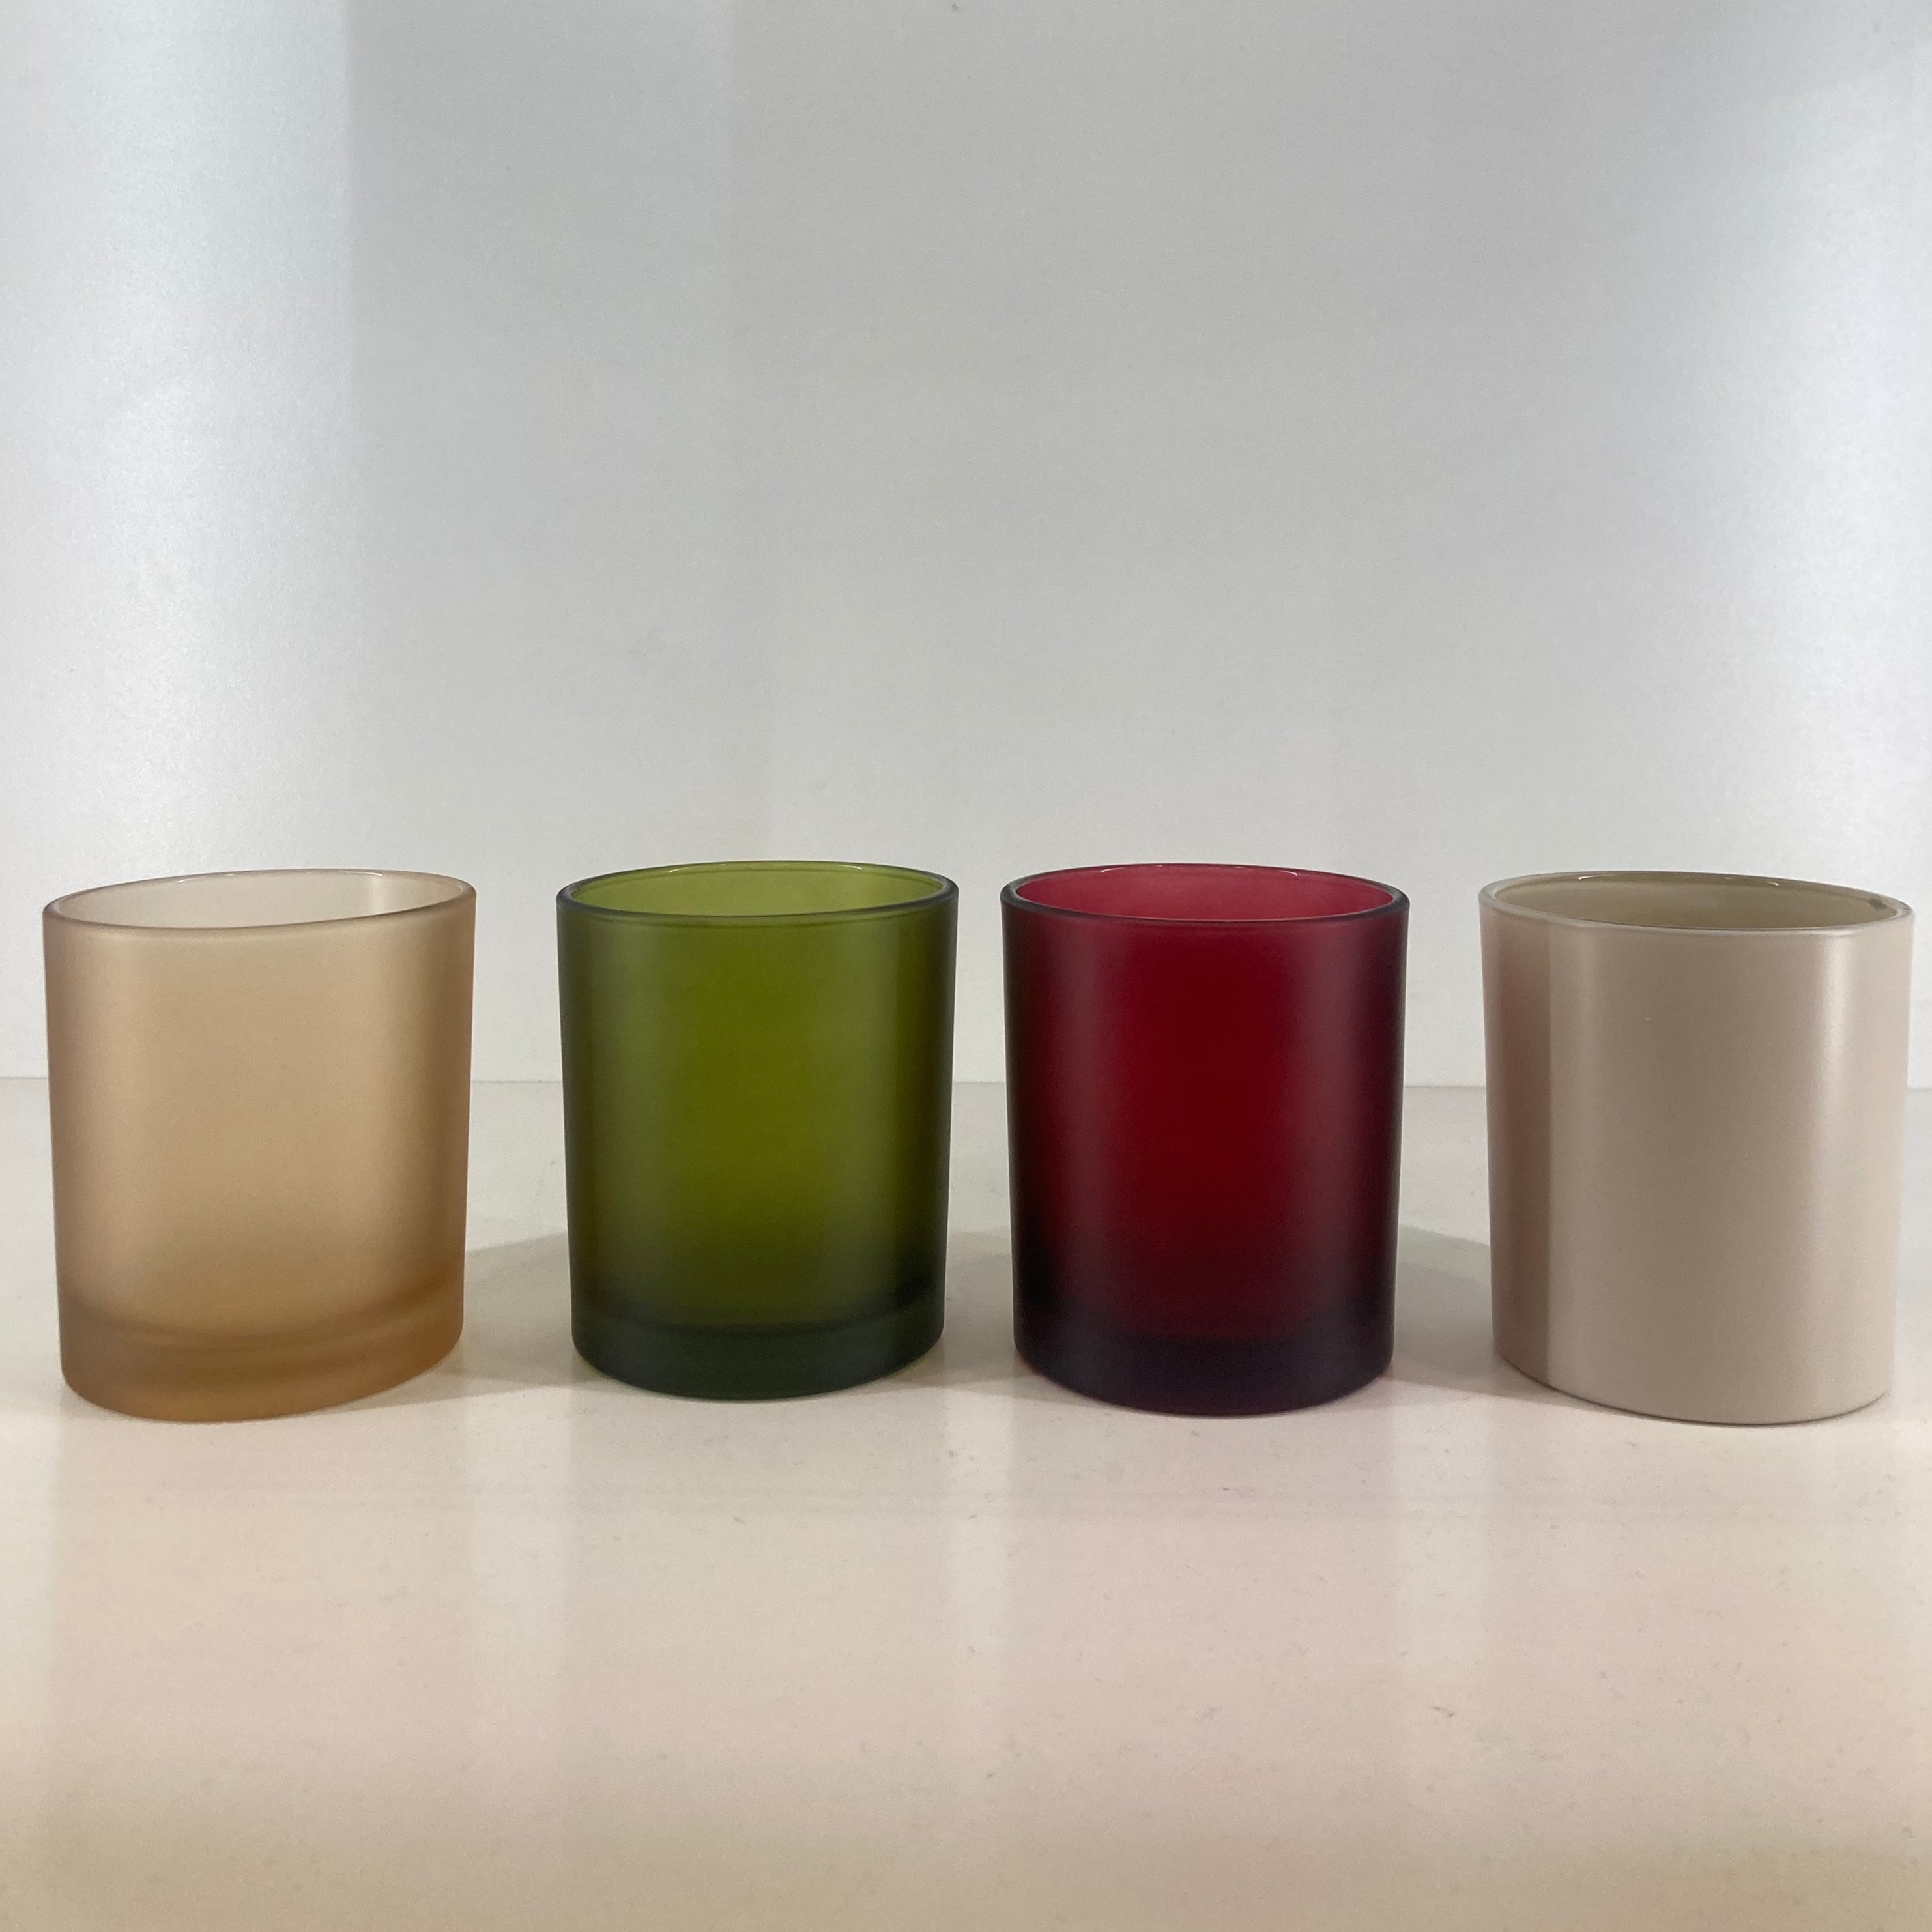 10.5 oz. vessel upgrade options champagne, emerald, ruby, and nude.